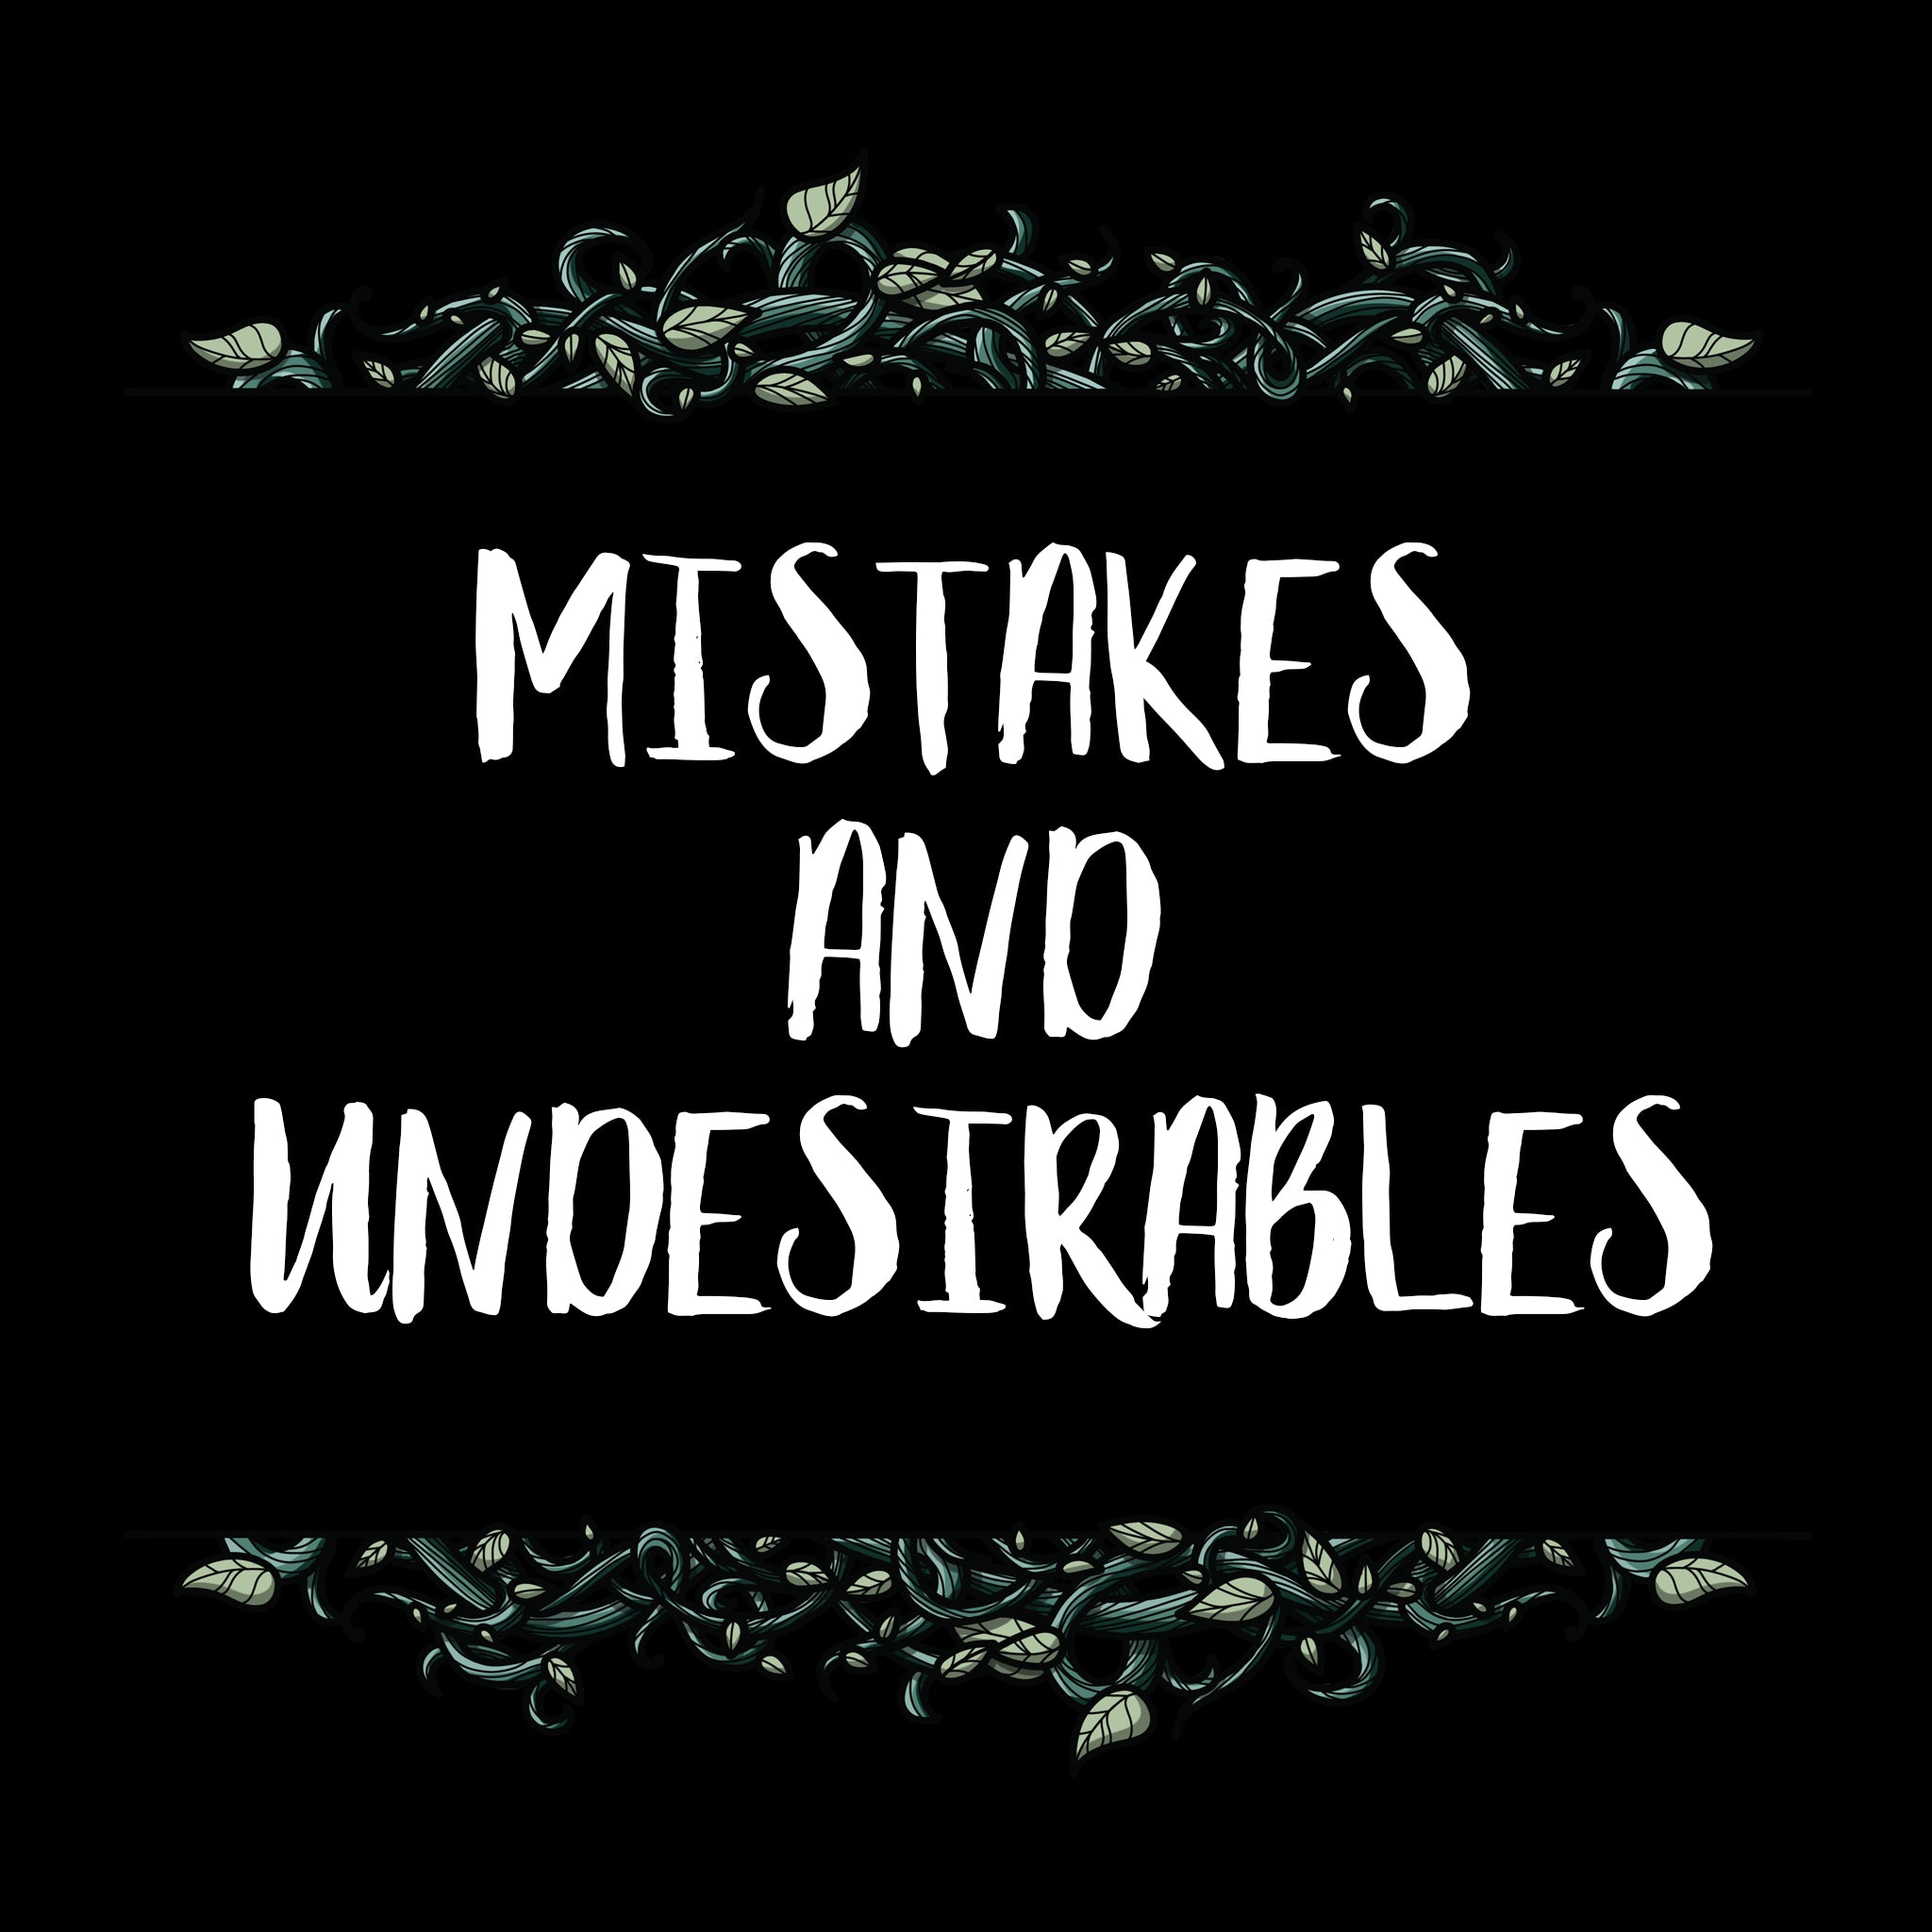 A Bundle of Mistakes and Undesirables